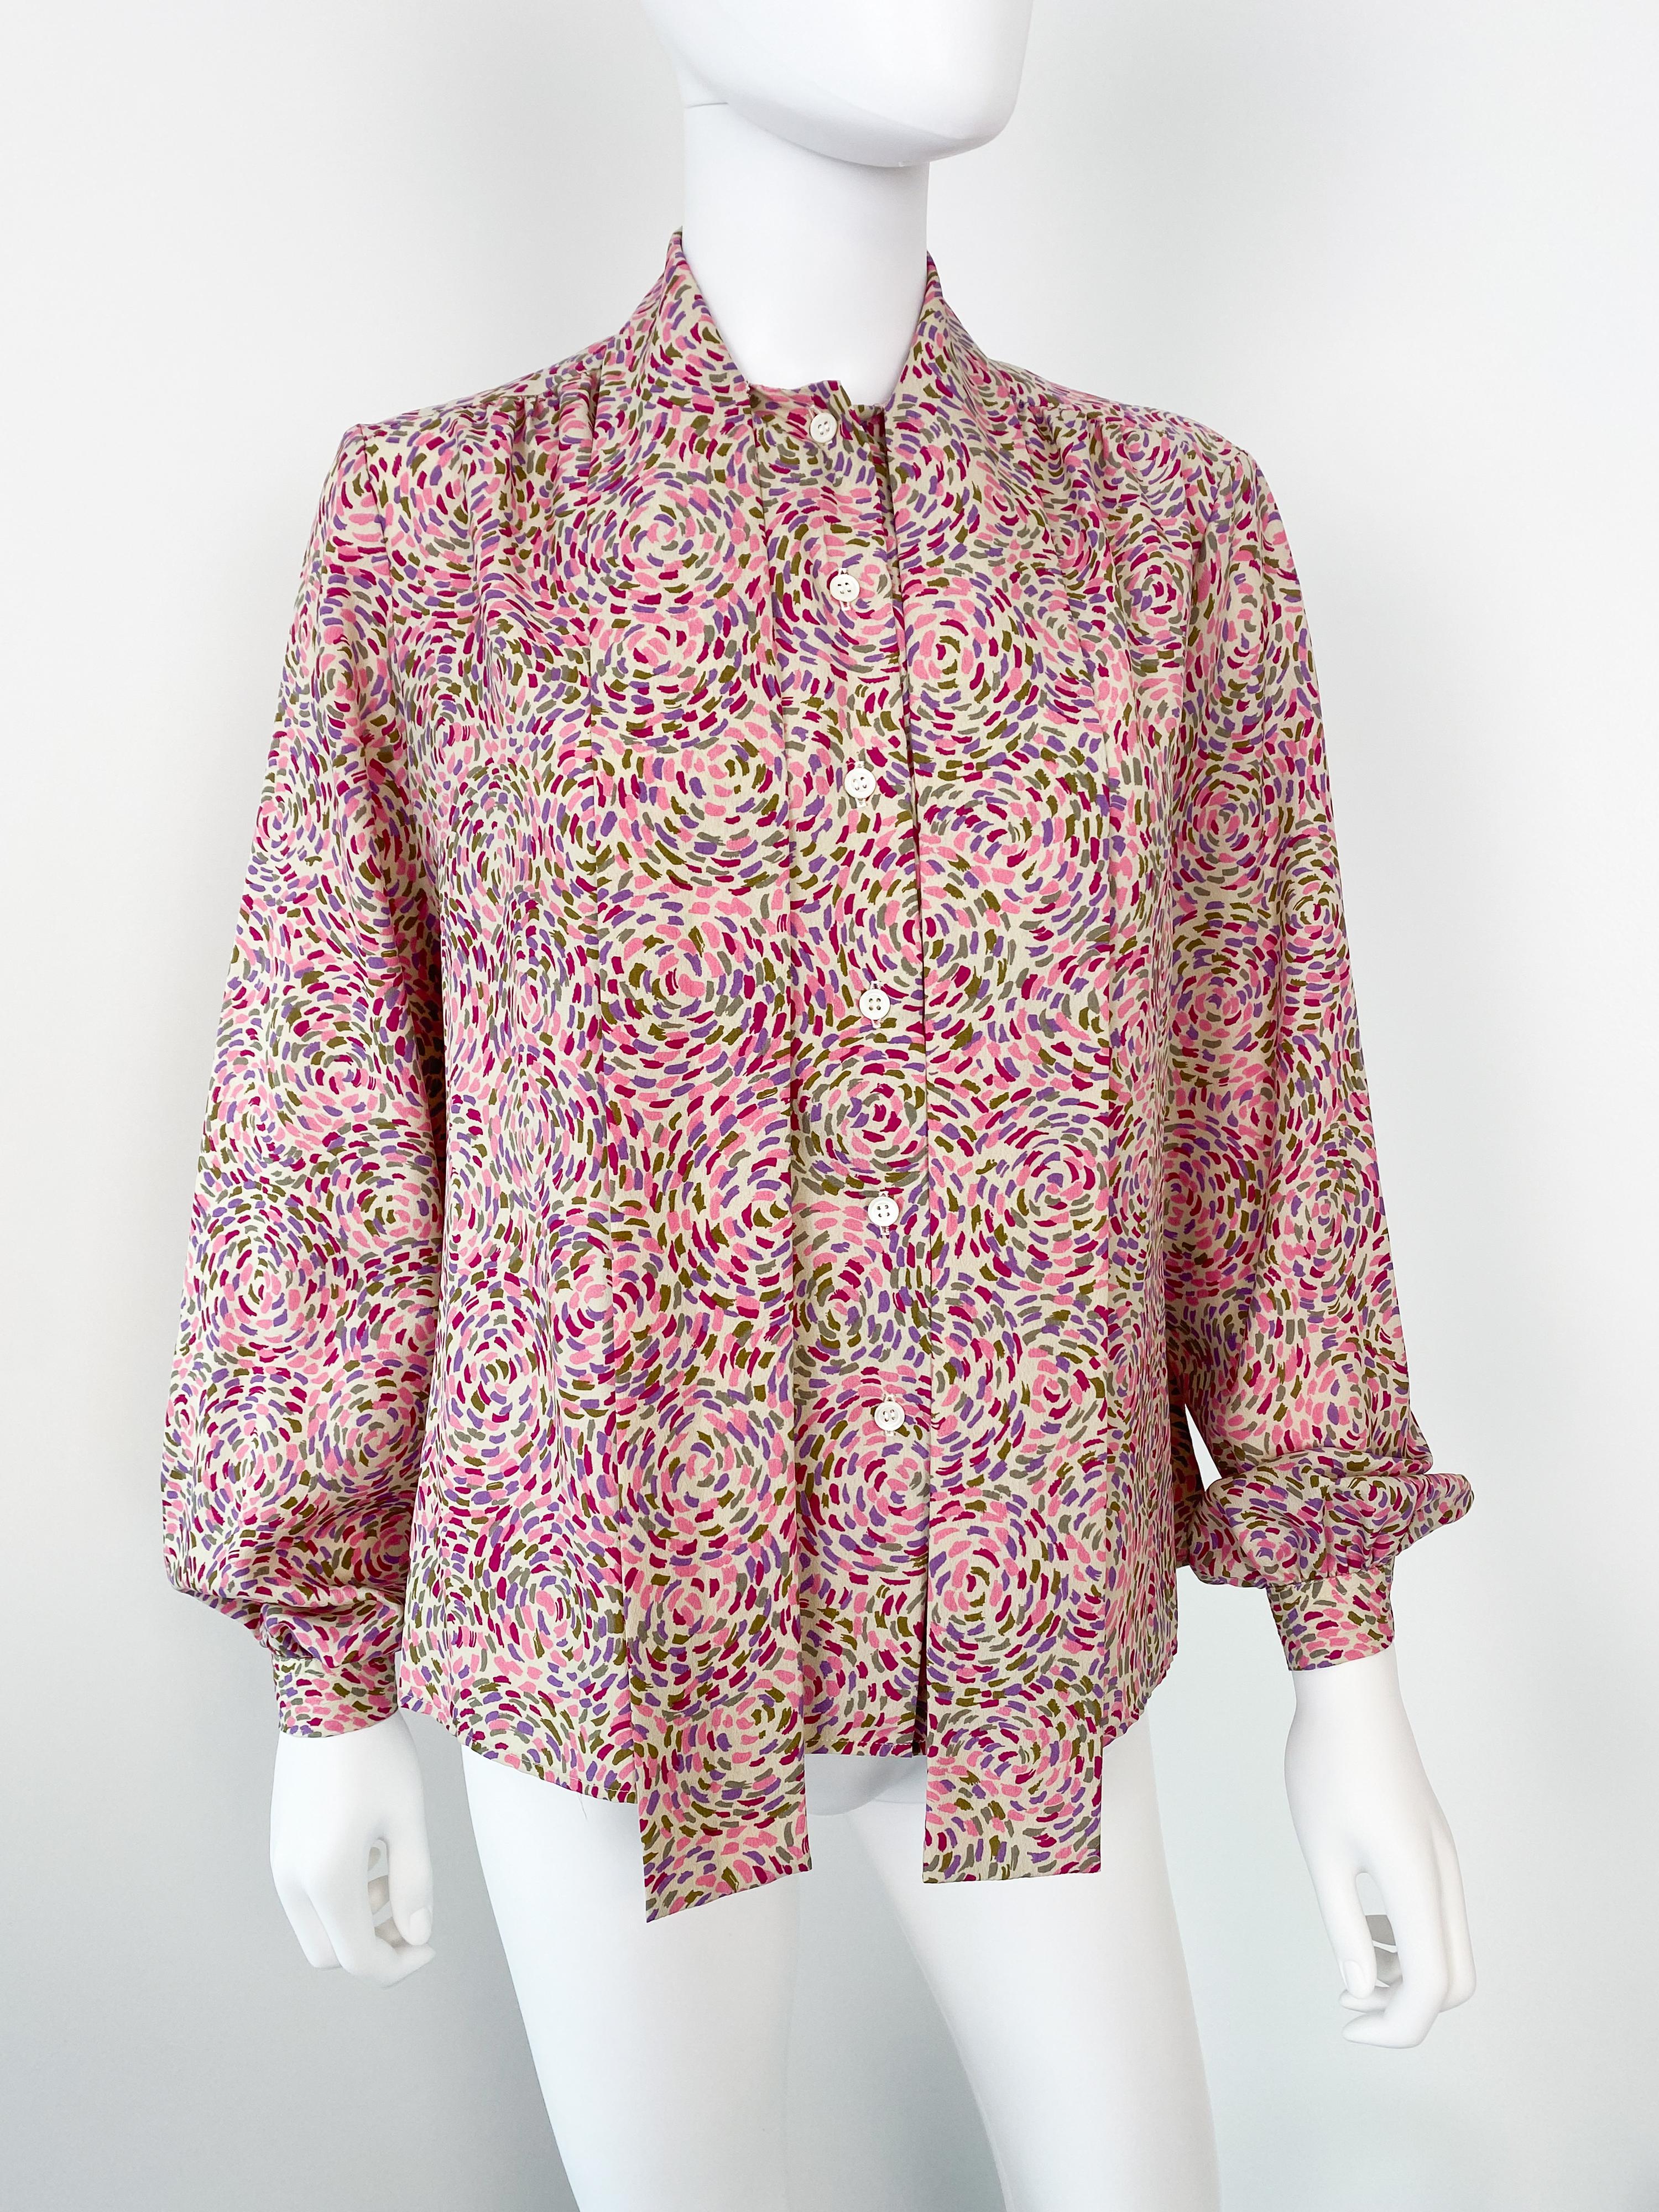 Women's Vintage 1980s Silky Polyester Blouse Top Pink Pointillism Print Size 8 For Sale